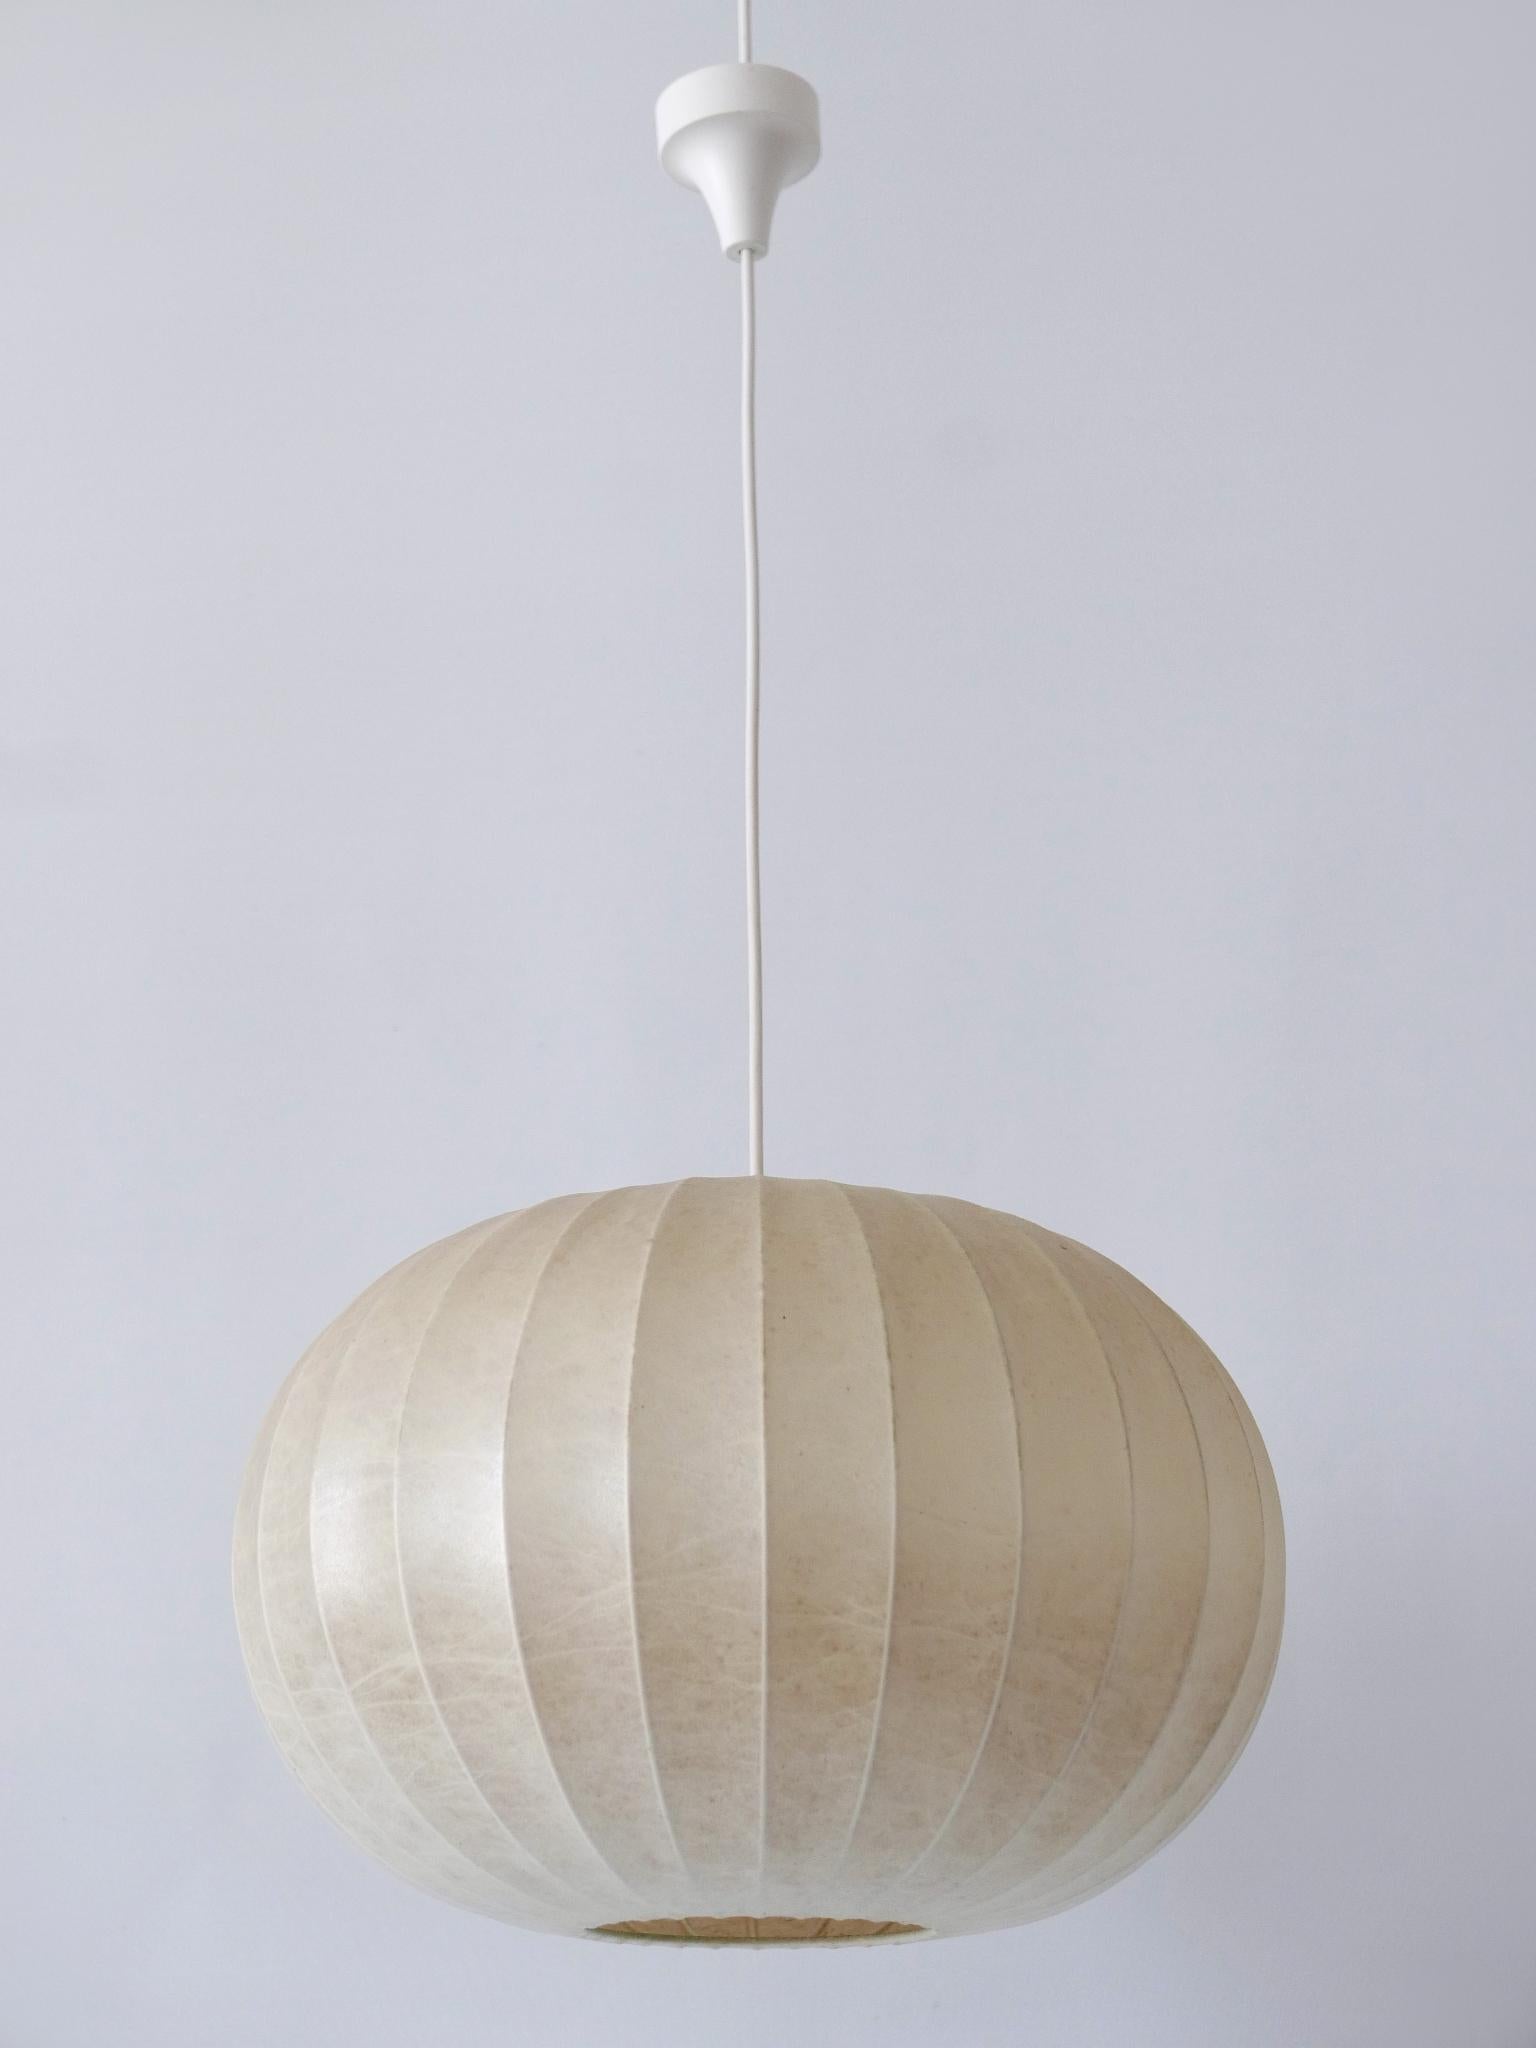 Lovely Midcentury Modern Cocoon Pendant Lamp or Hanging Light Germany 1960s For Sale 2